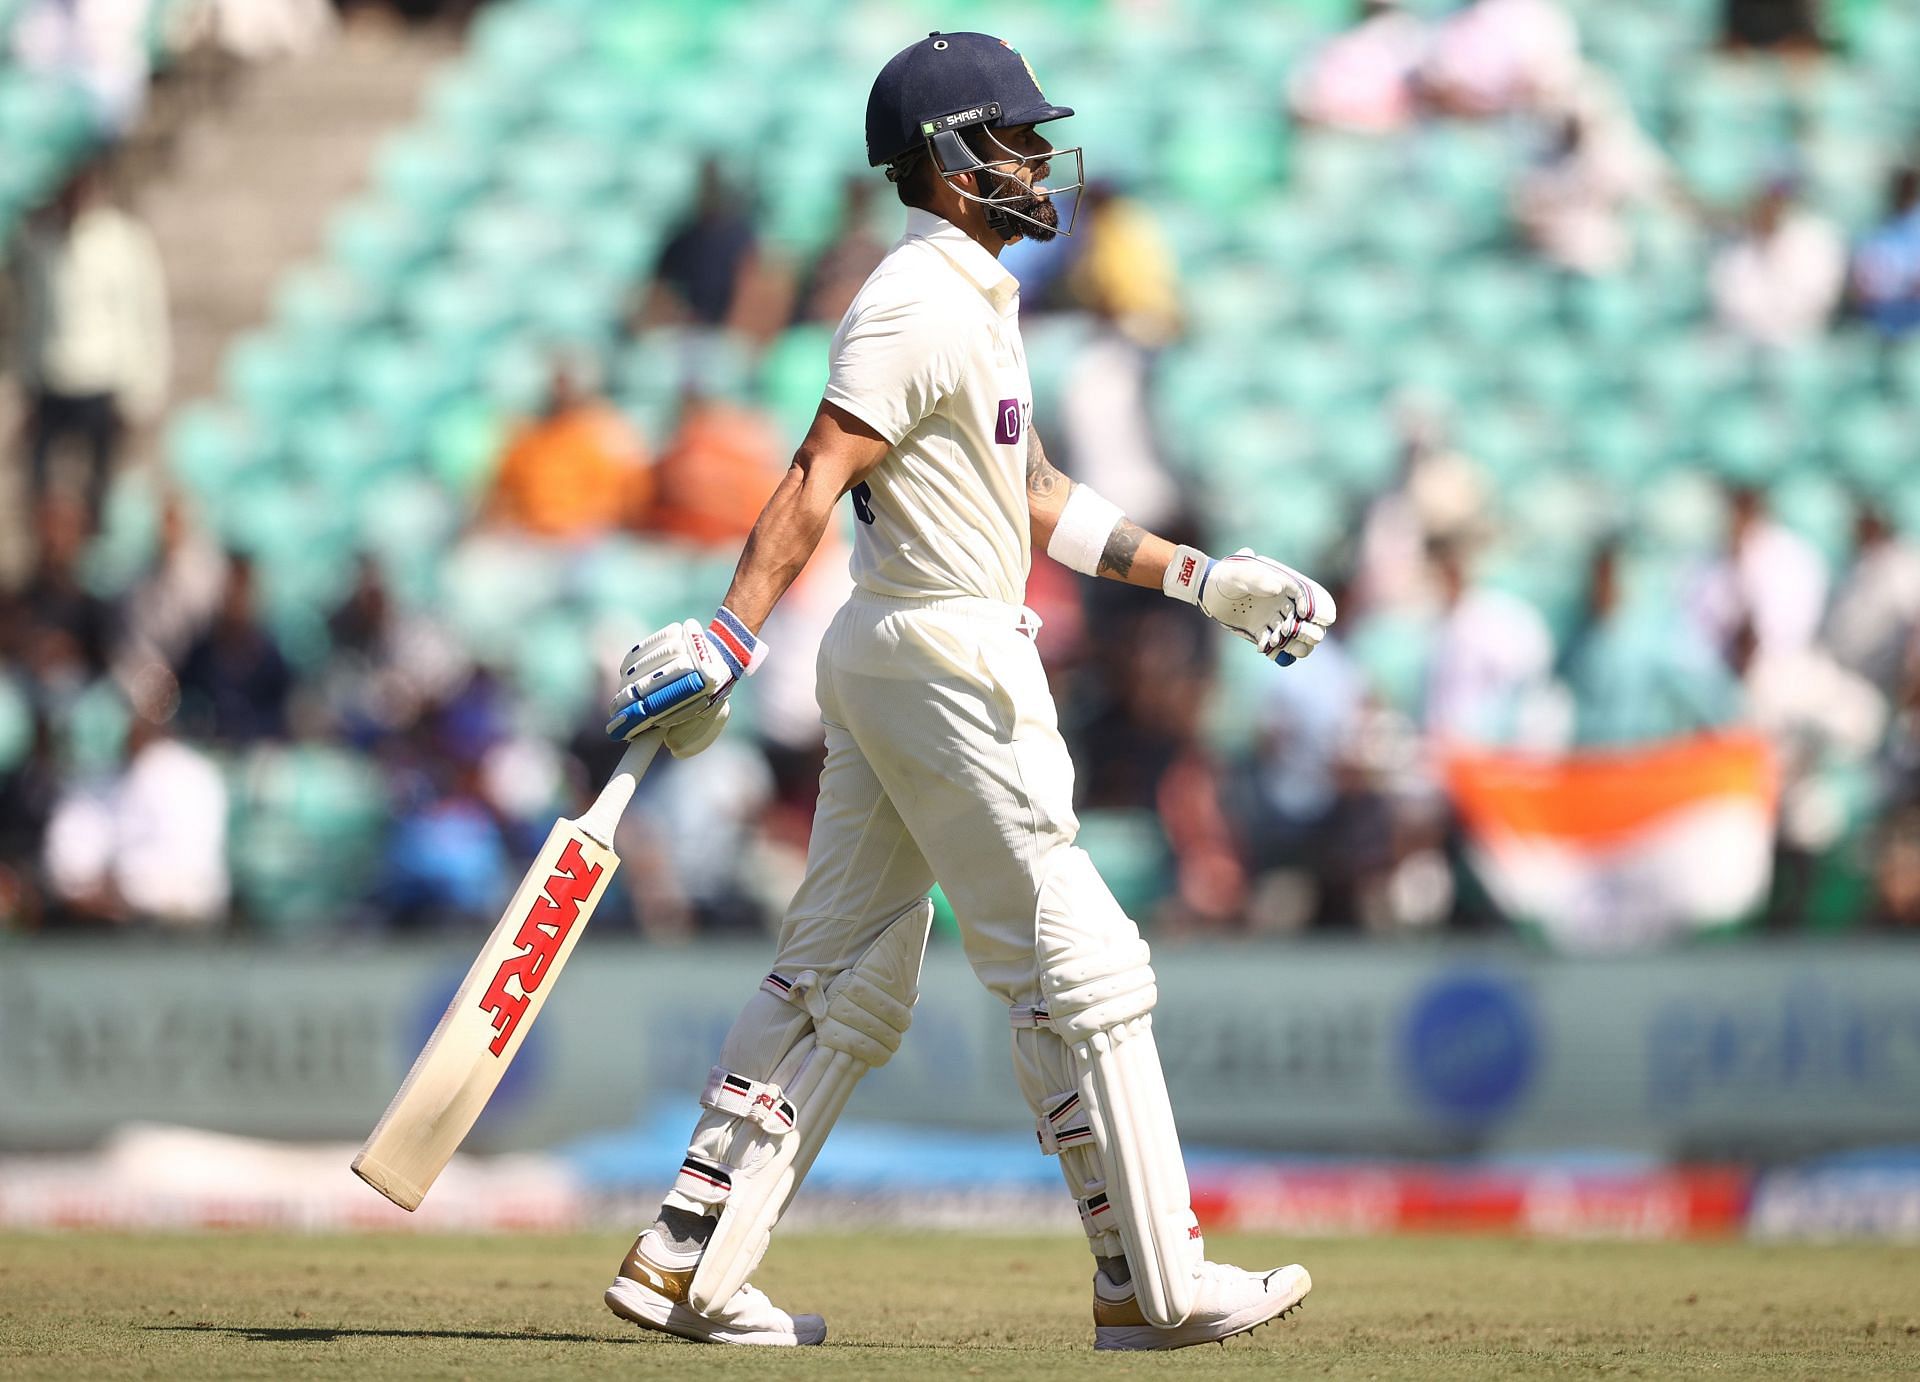 He's feeling the pressure, no doubt about it" - Mark Waugh on Virat Kohli's  lean patch in red-ball cricket